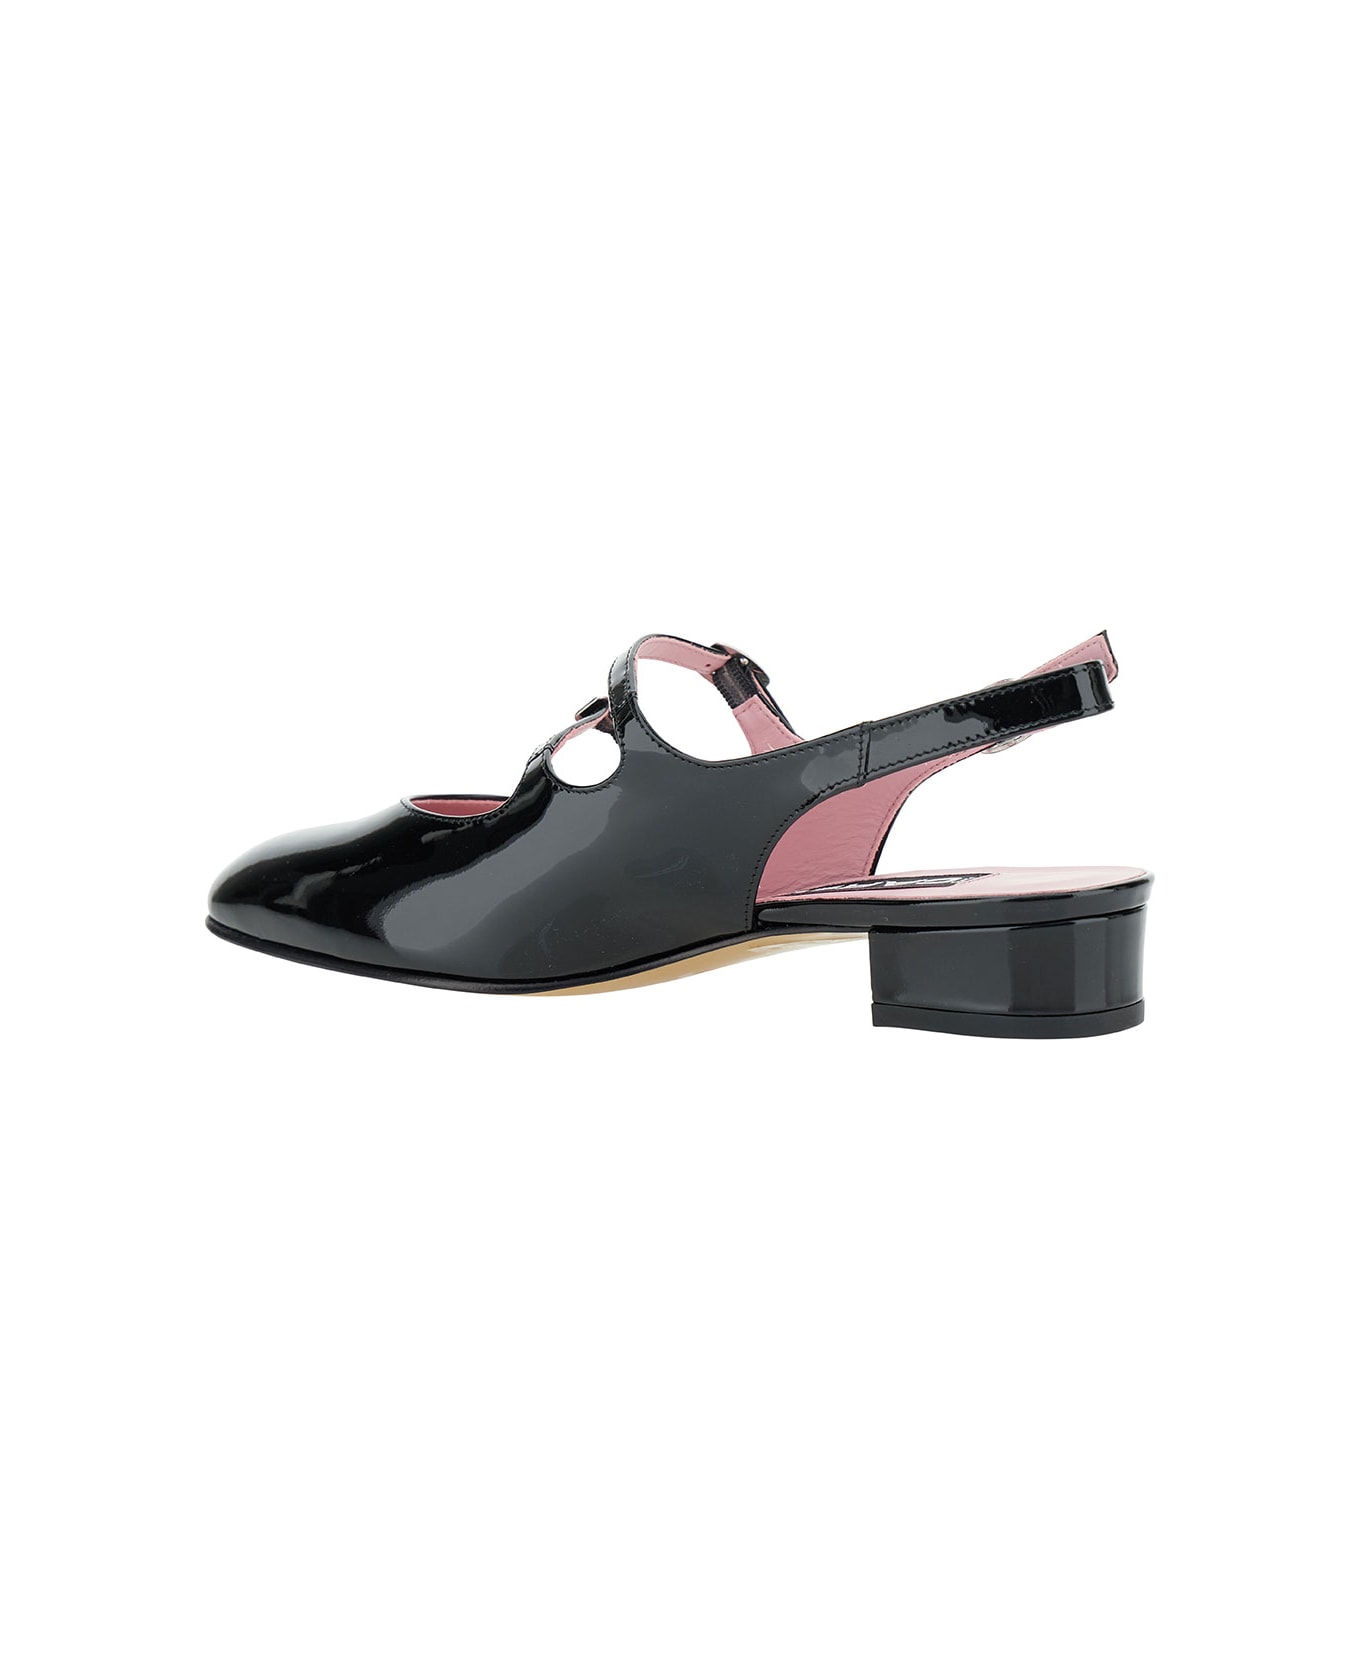 Carel Black Slingback Mary Janes With Block Heel In Patent Leather Woman - Black ハイヒール